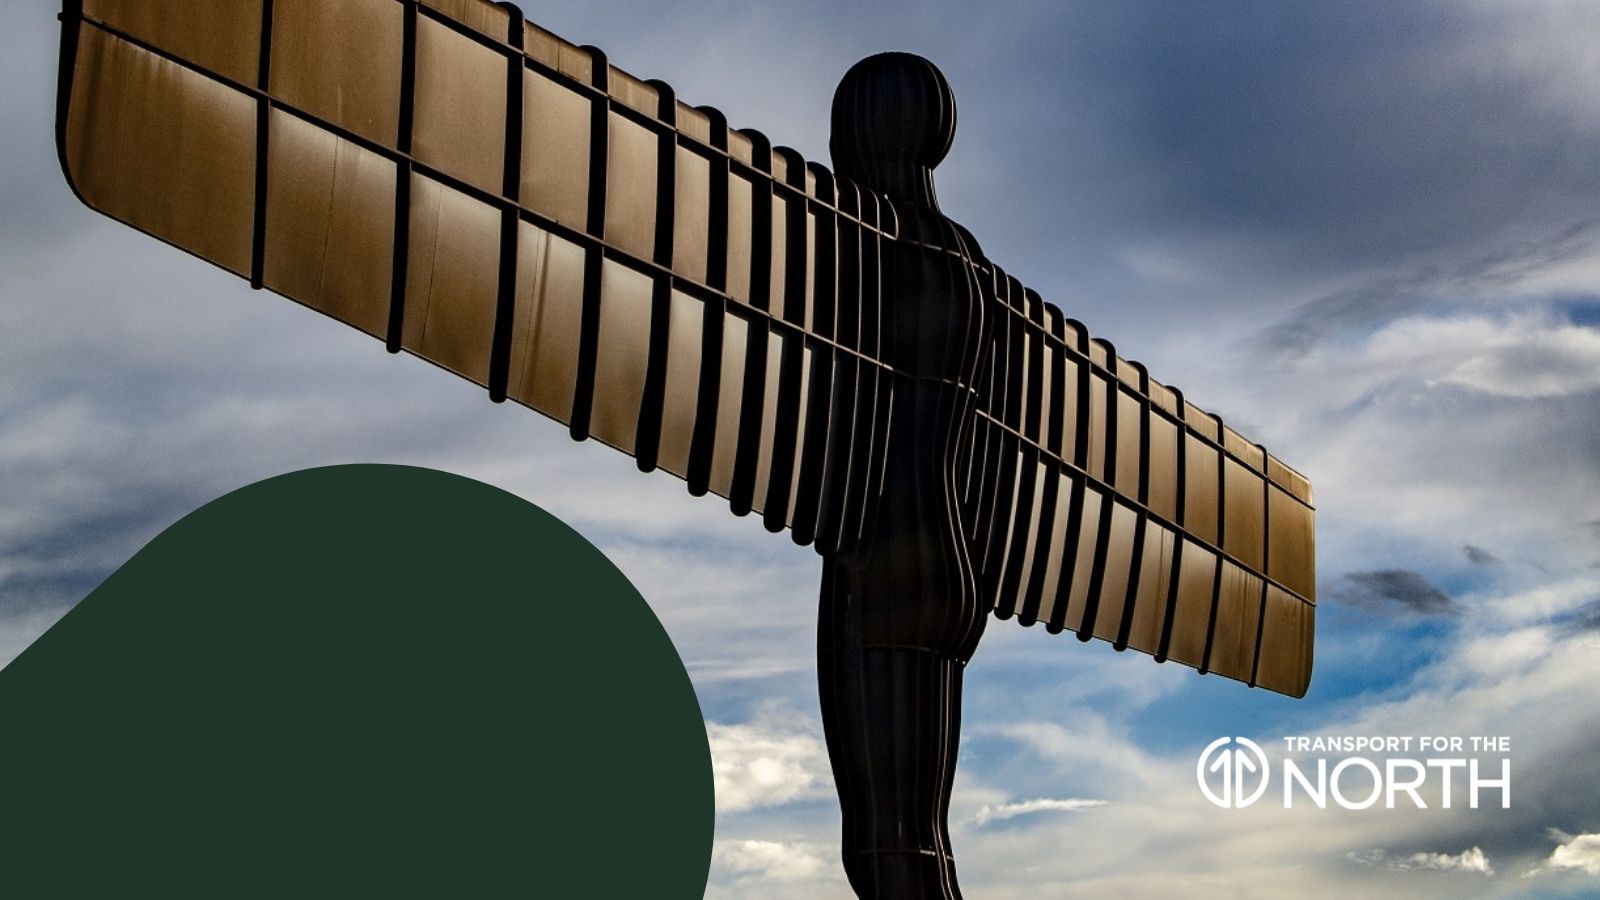 Angel of the North Statue